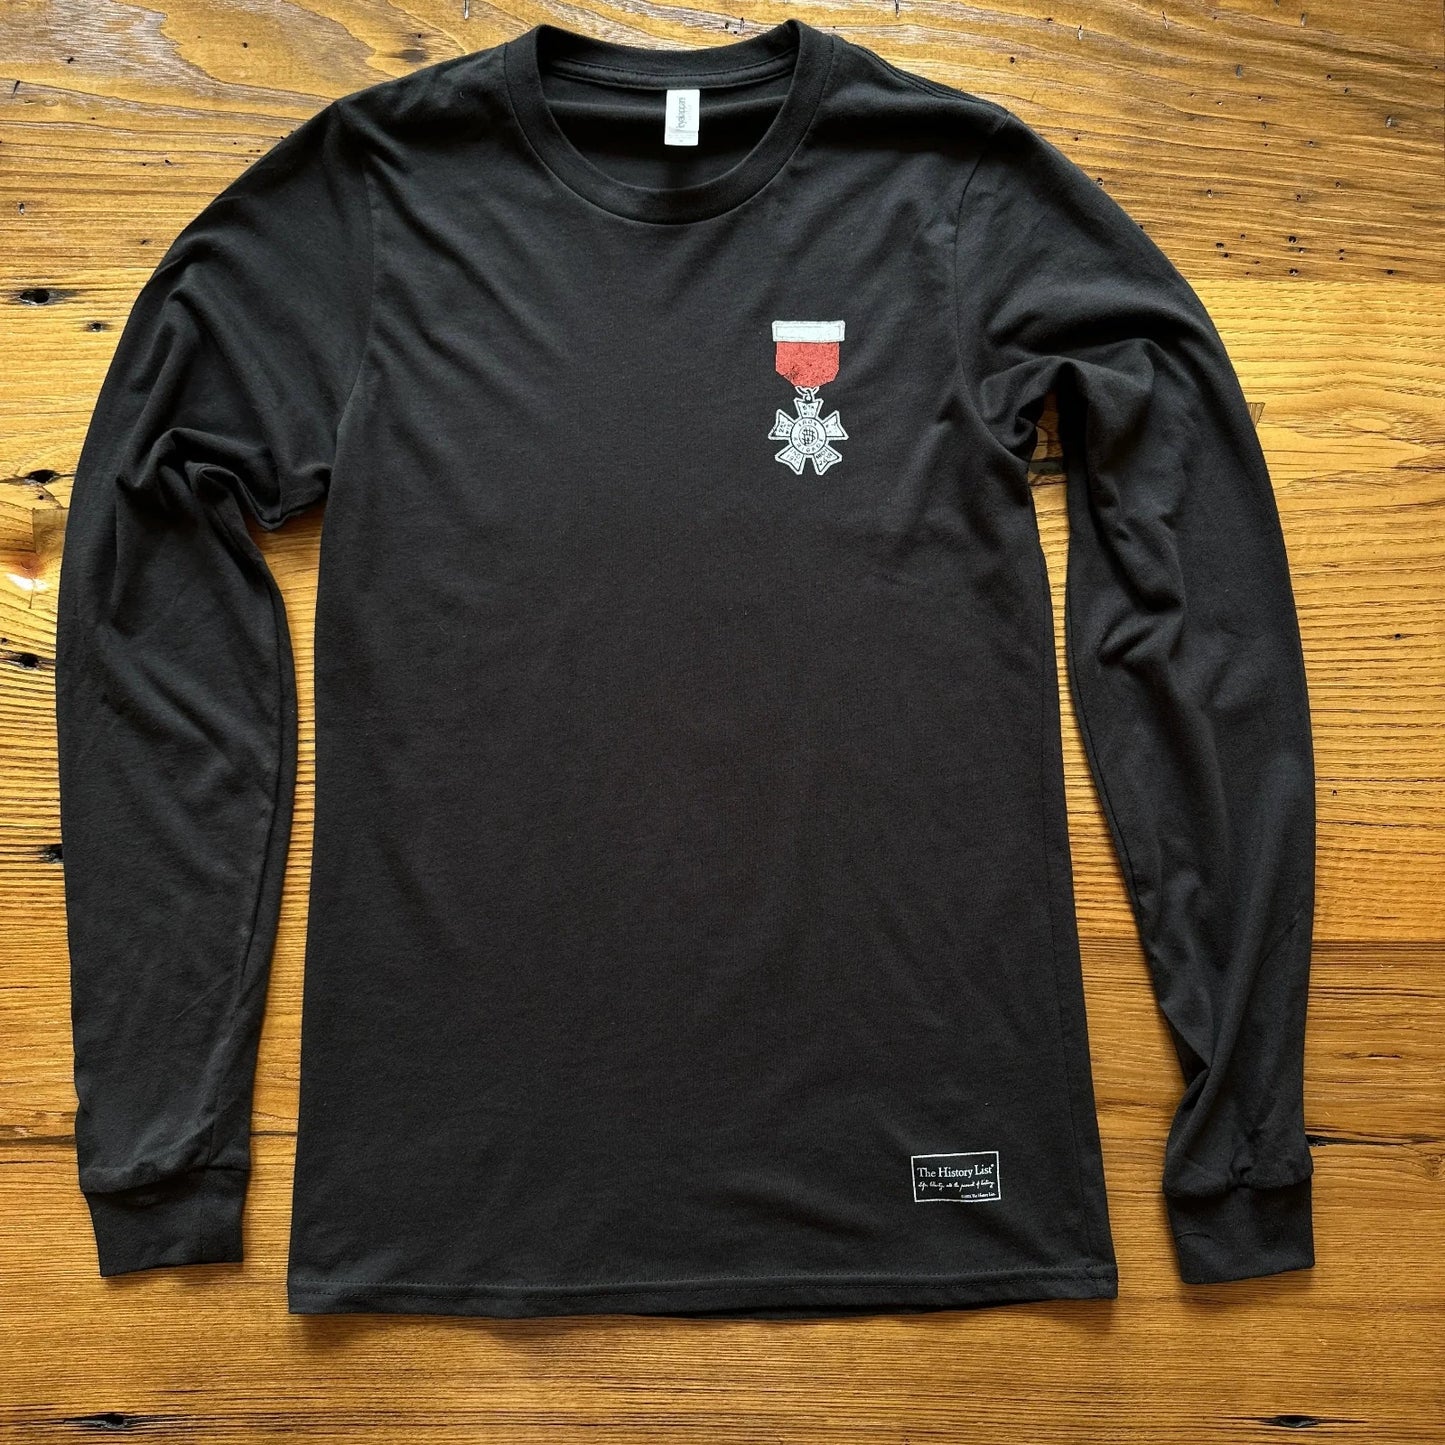 Front of The Civil War "Iron Brigade" Long-Sleeved Shirt Made in America from The History List store